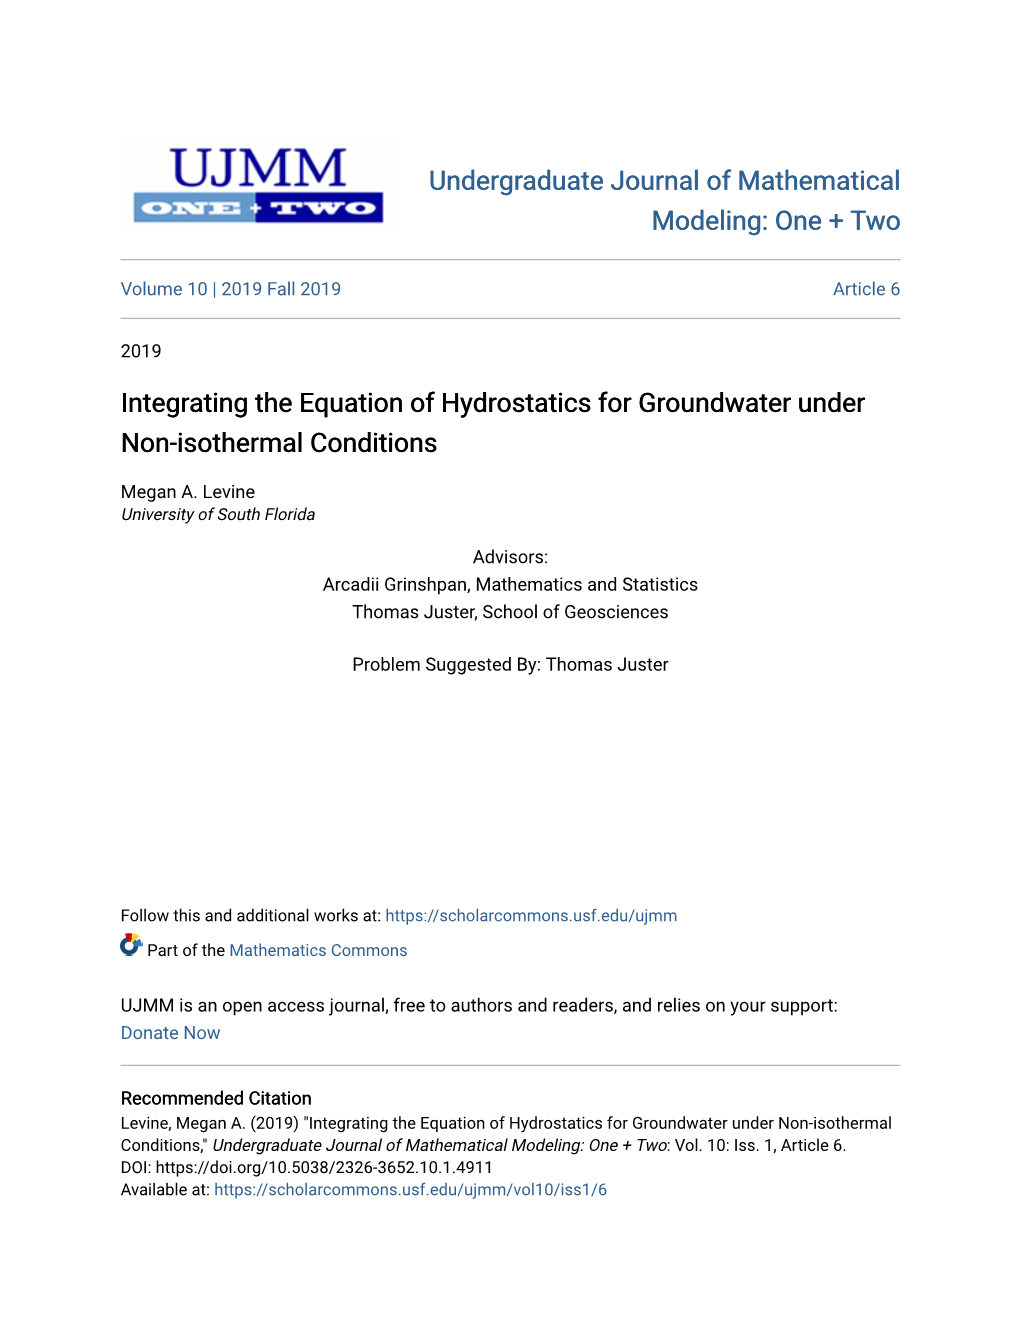 Integrating the Equation of Hydrostatics for Groundwater Under Non-Isothermal Conditions